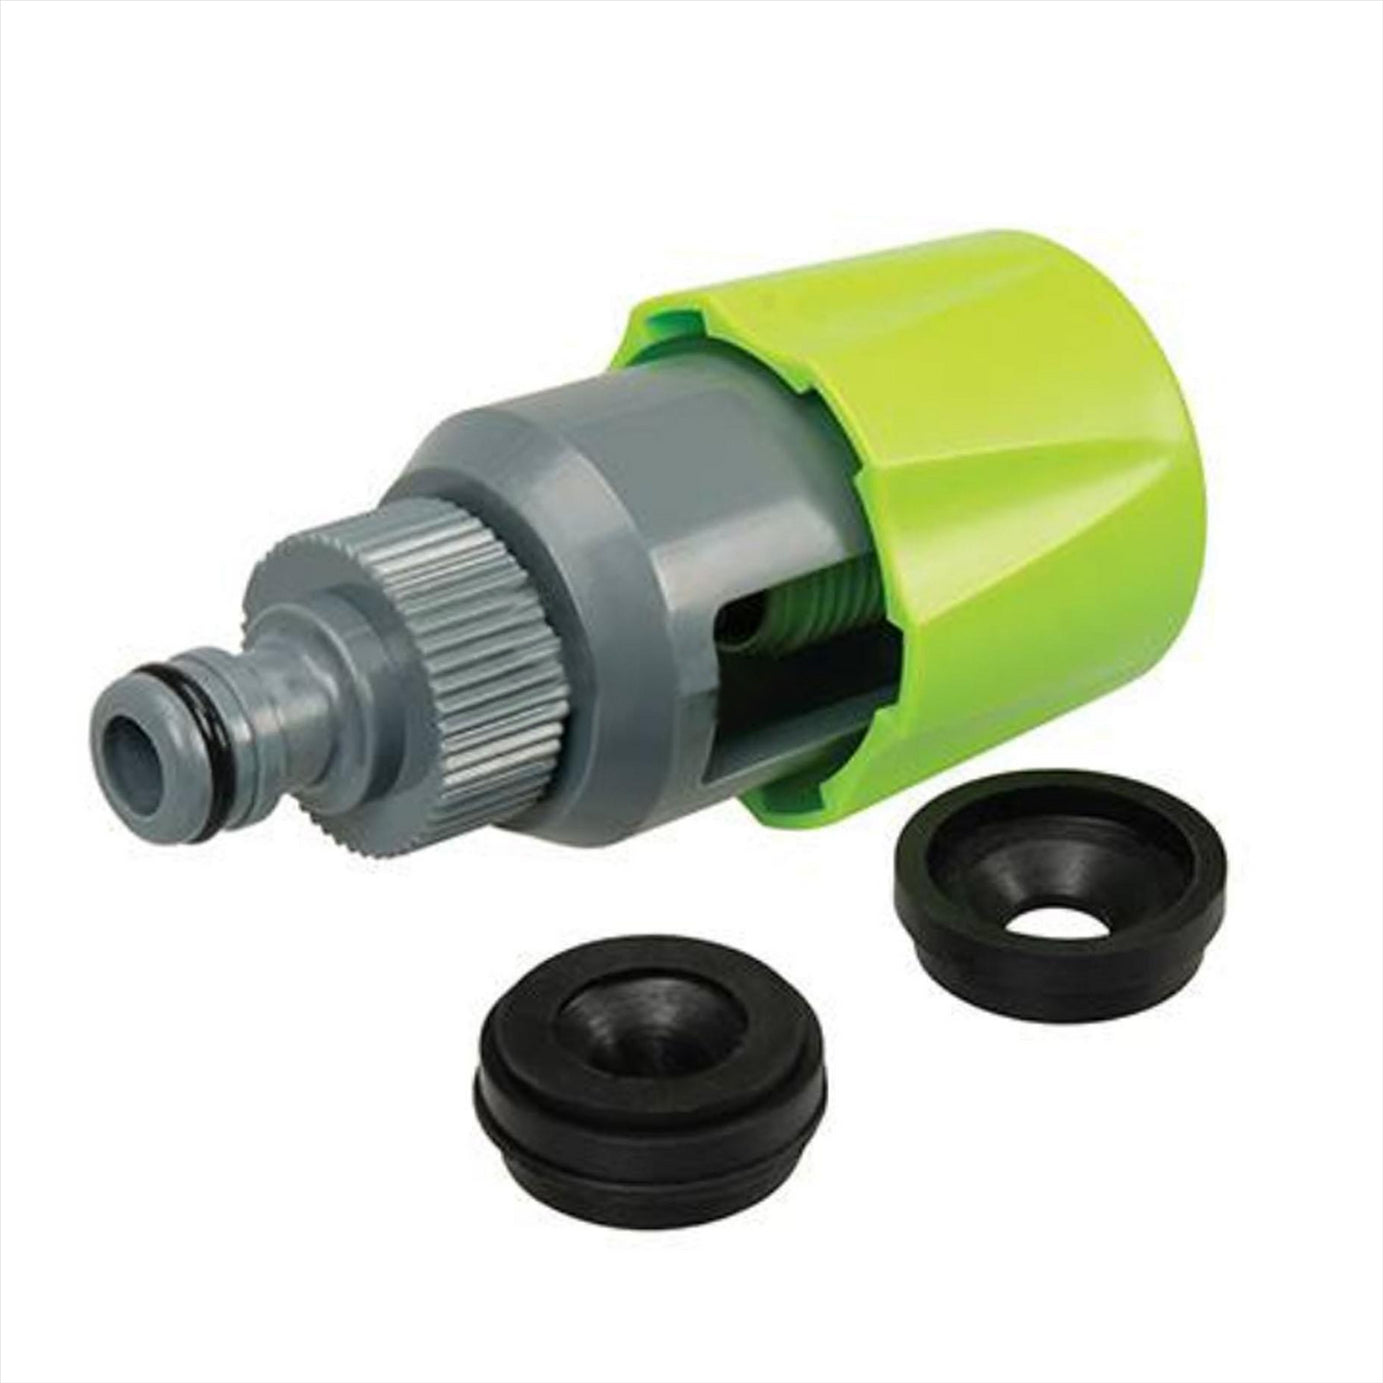 Universal Mixer Suitable For Mixer Tap Head 34mm - 43mm Male Hose Connector.